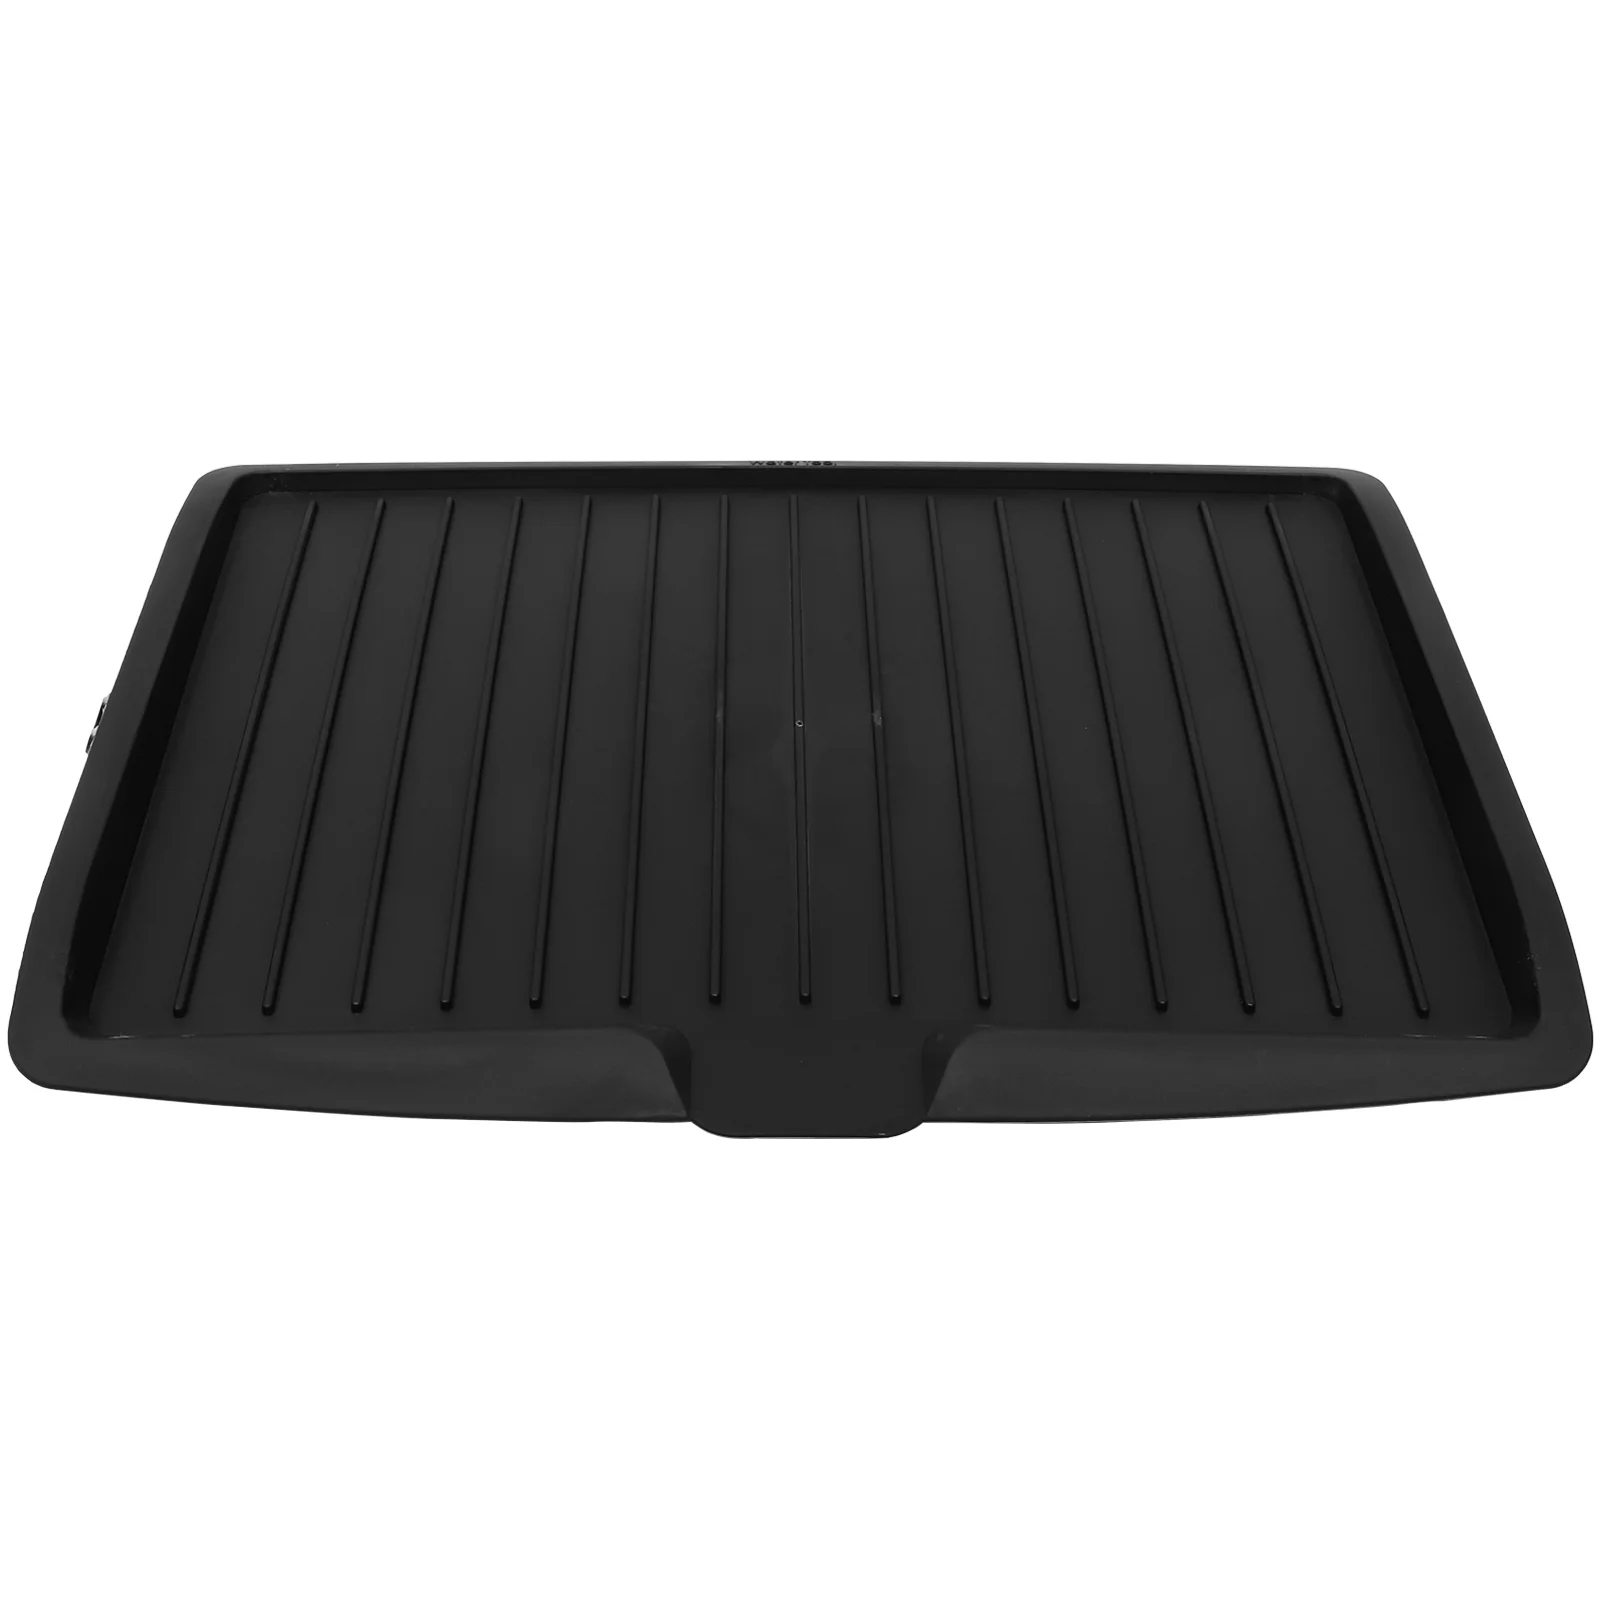 

Plastic Dish Drainer Board Water Drain Board Drying Plate Draining Tray Side Drop Bowl Dishes Draining Plate Pots Pans Fruit